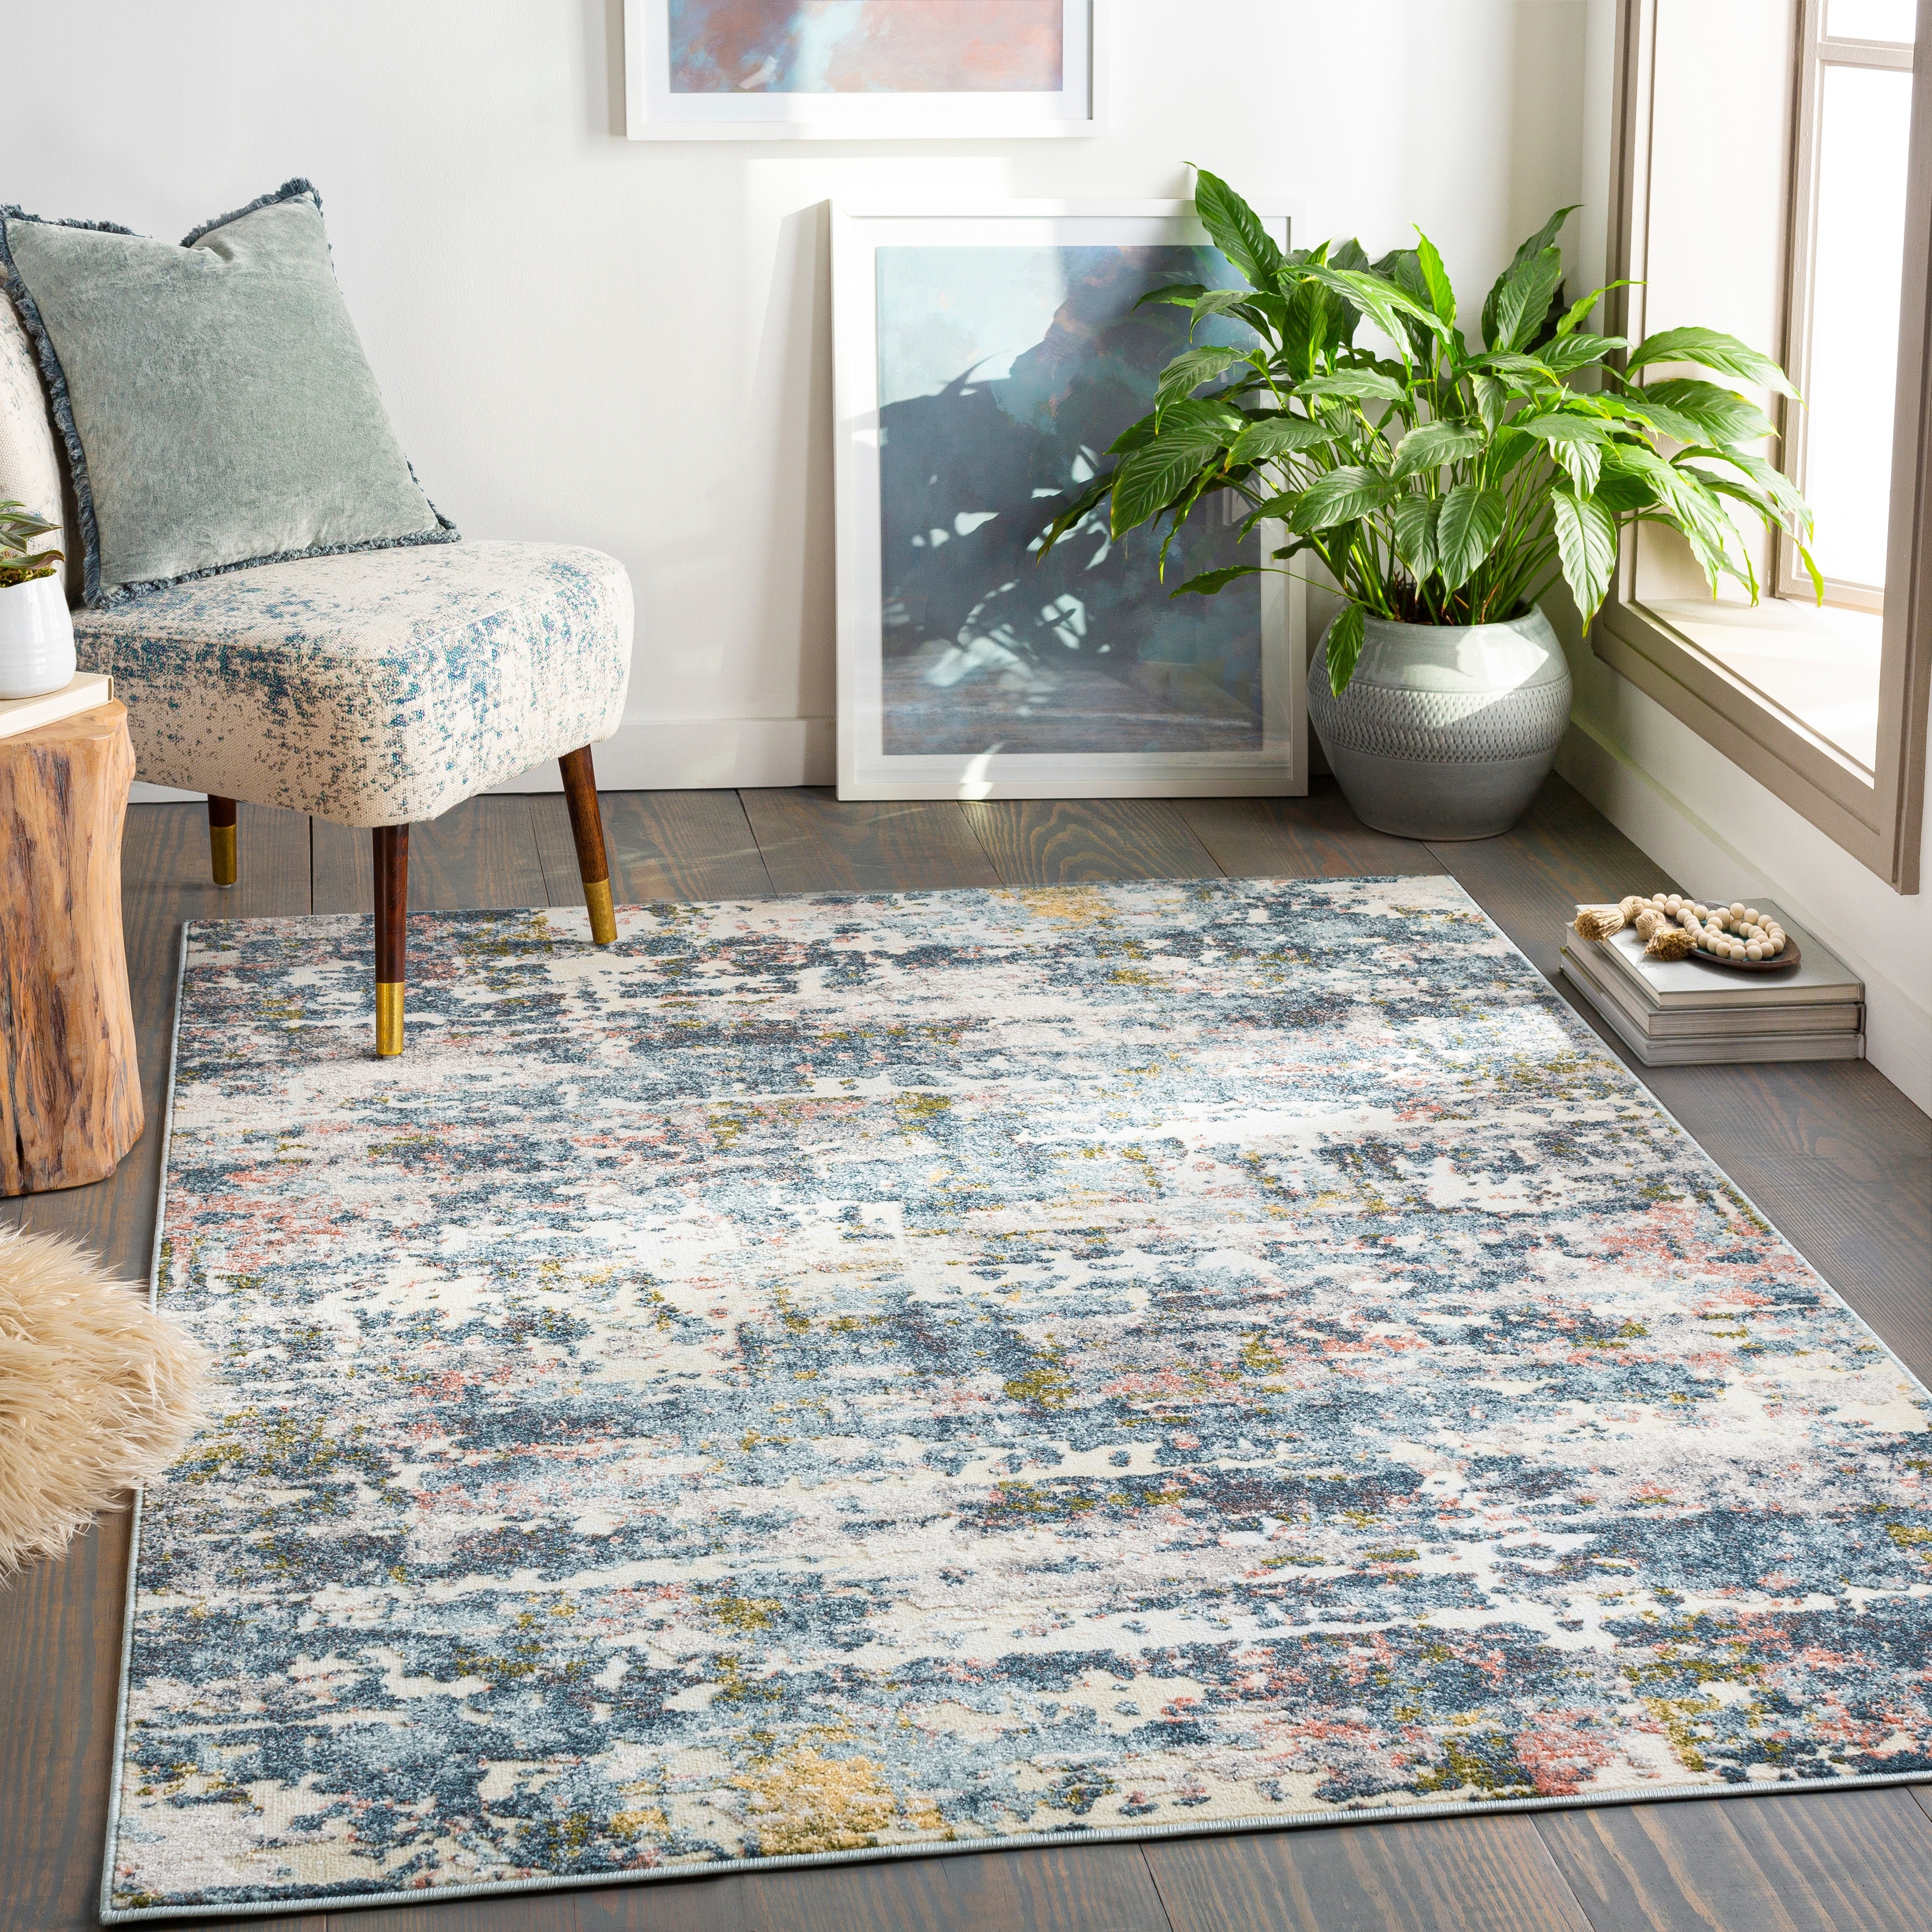 https://ak1.ostkcdn.com/images/products/is/images/direct/14ac8bf08984c3fca52a3ec930f5f4b095fdab41/Straub-Abstract-Industrial-Area-Rug.jpg